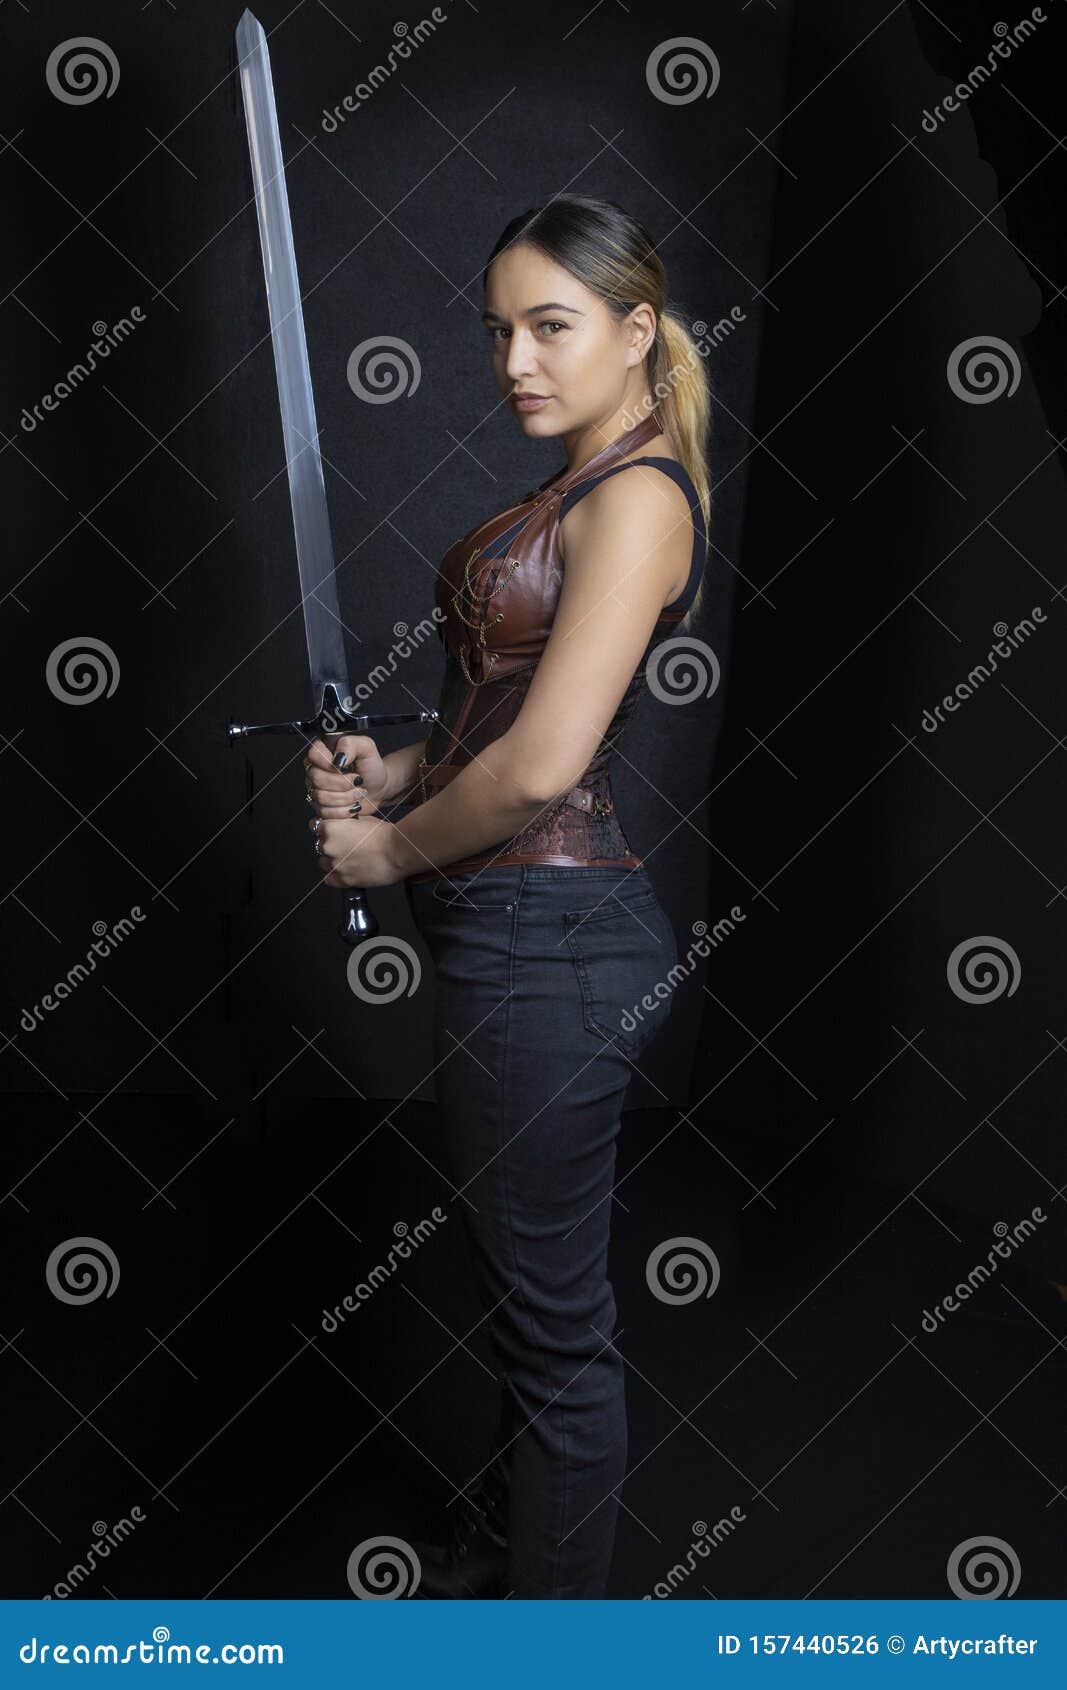 young woman in urban fantasy poses on a black background